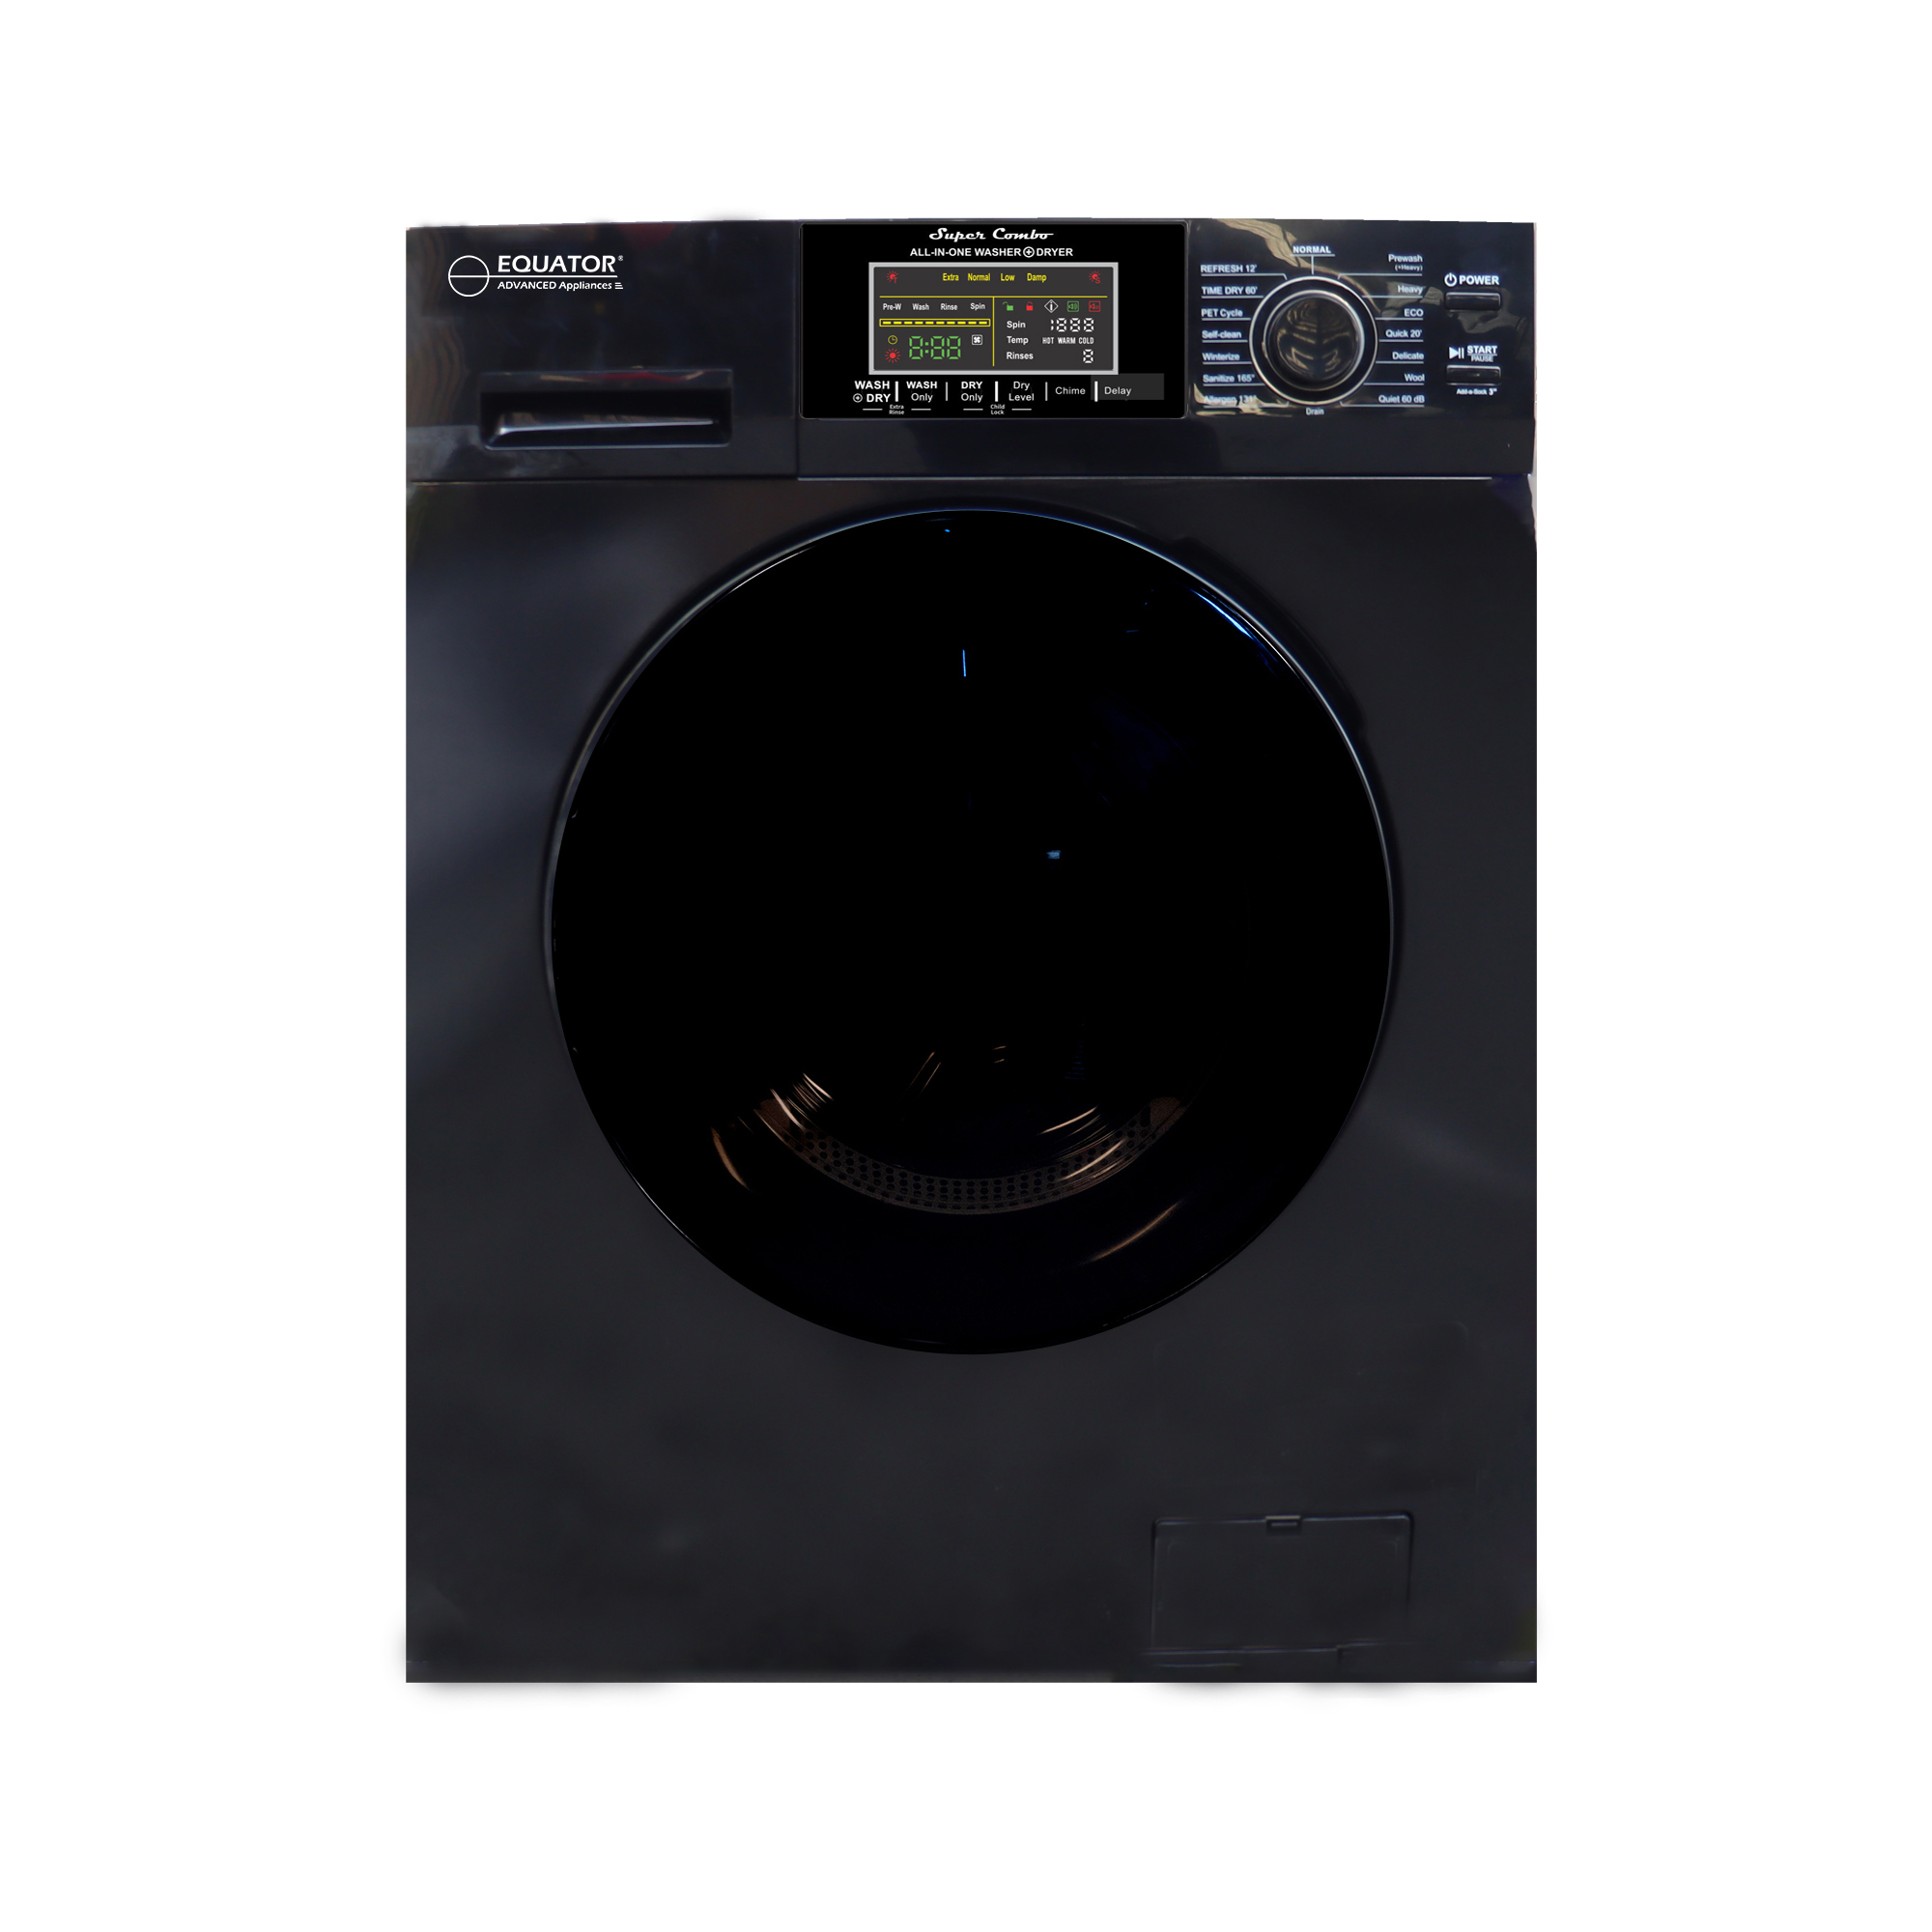 Equator Combo Washer Dryer VENTED-DRY 30% Faster than Condense 110V 15lb 1400RPM in Black